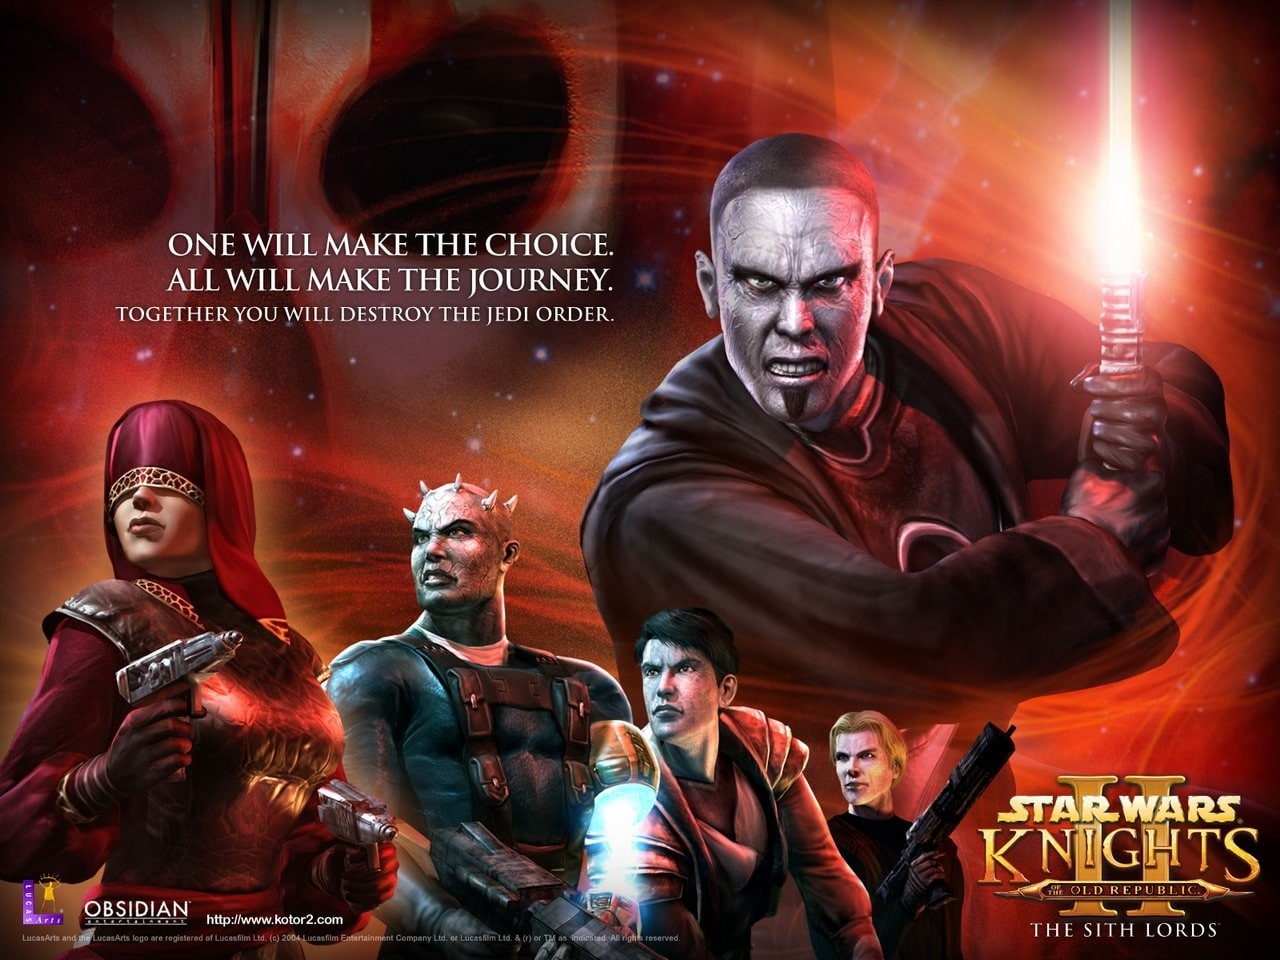 Star Wars Knights of the Old Republic II: The Sith Lords in arrivo su dispositivi mobili (video)